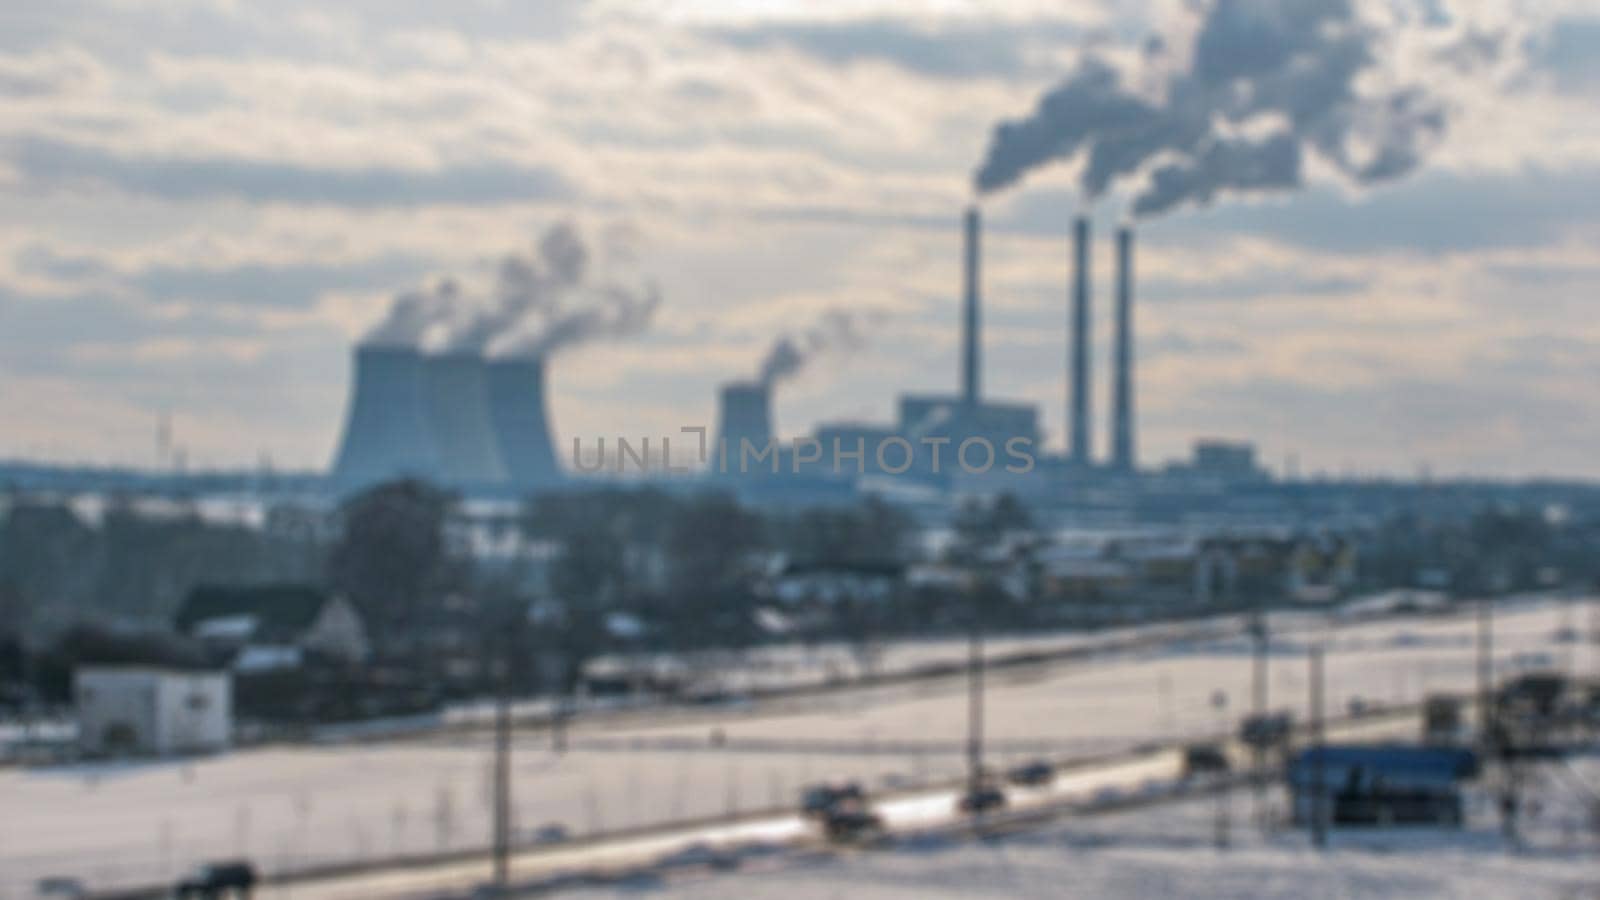 Blur with bokeh elements in a creative illustration on the theme of industrialization and industry. Stock illustration for banners and backgrounds.